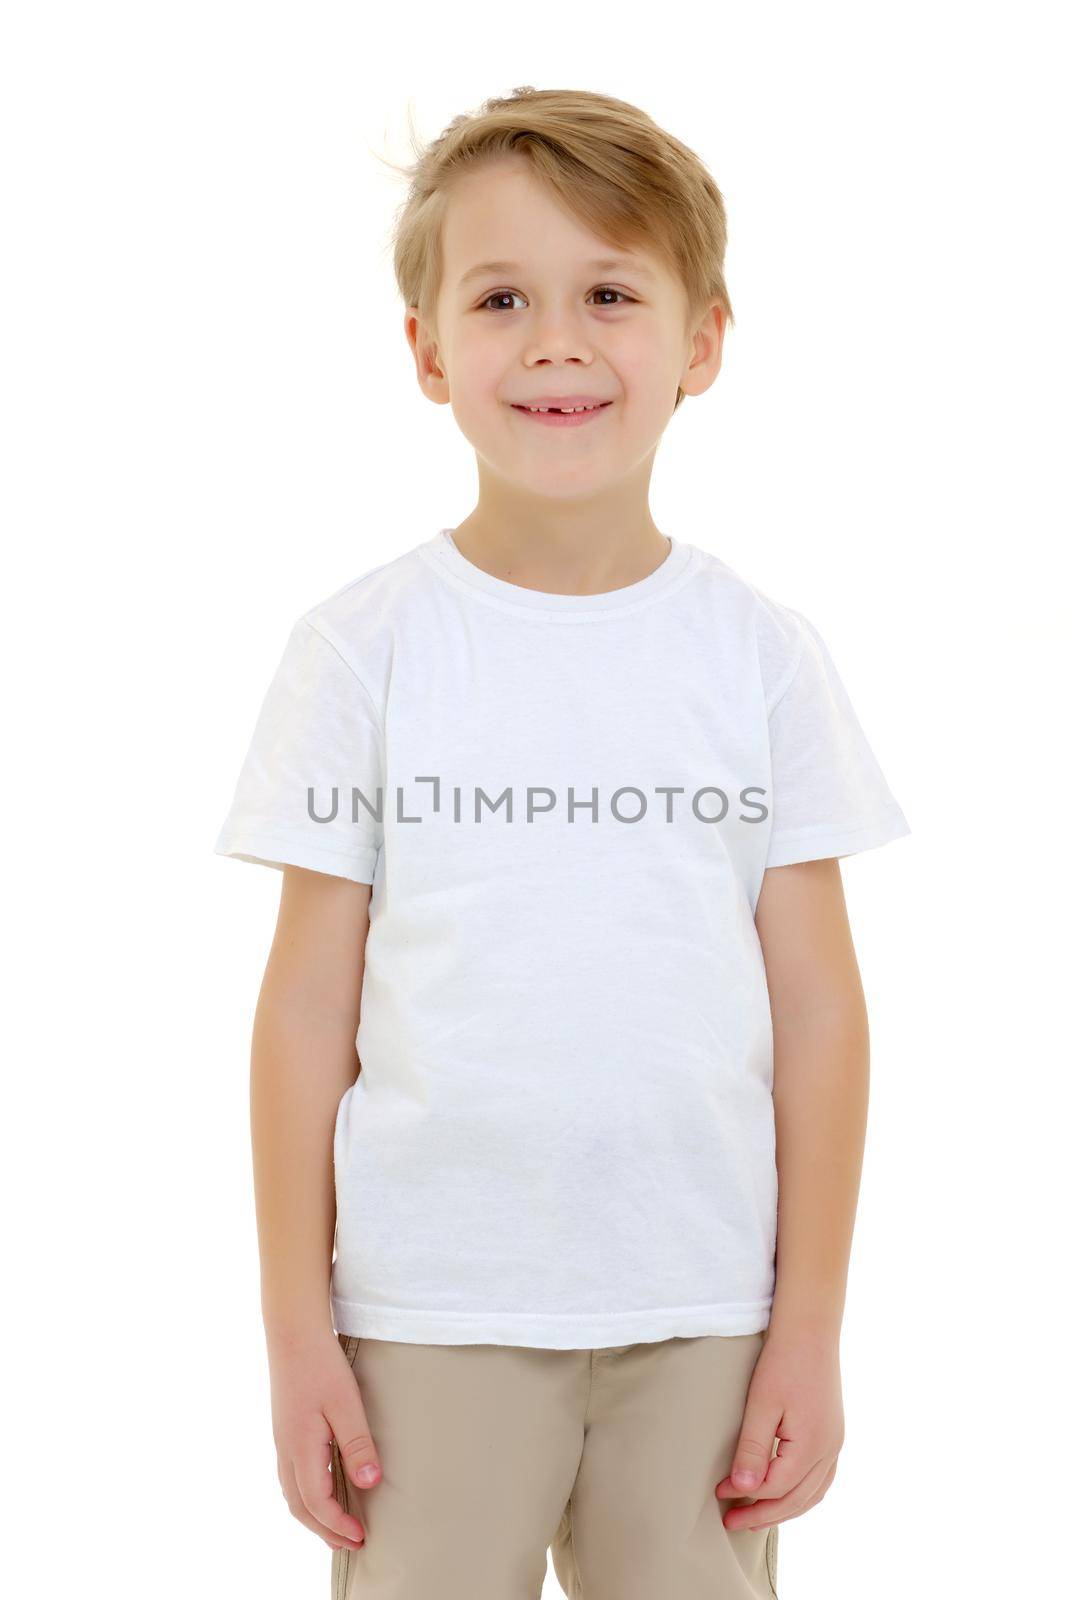 A cute, emotional little boy in a clean white t-shirt. On which you can write a company logo or advertising inscription. The concept of sale and promotion of children's products. Isolated on white background.